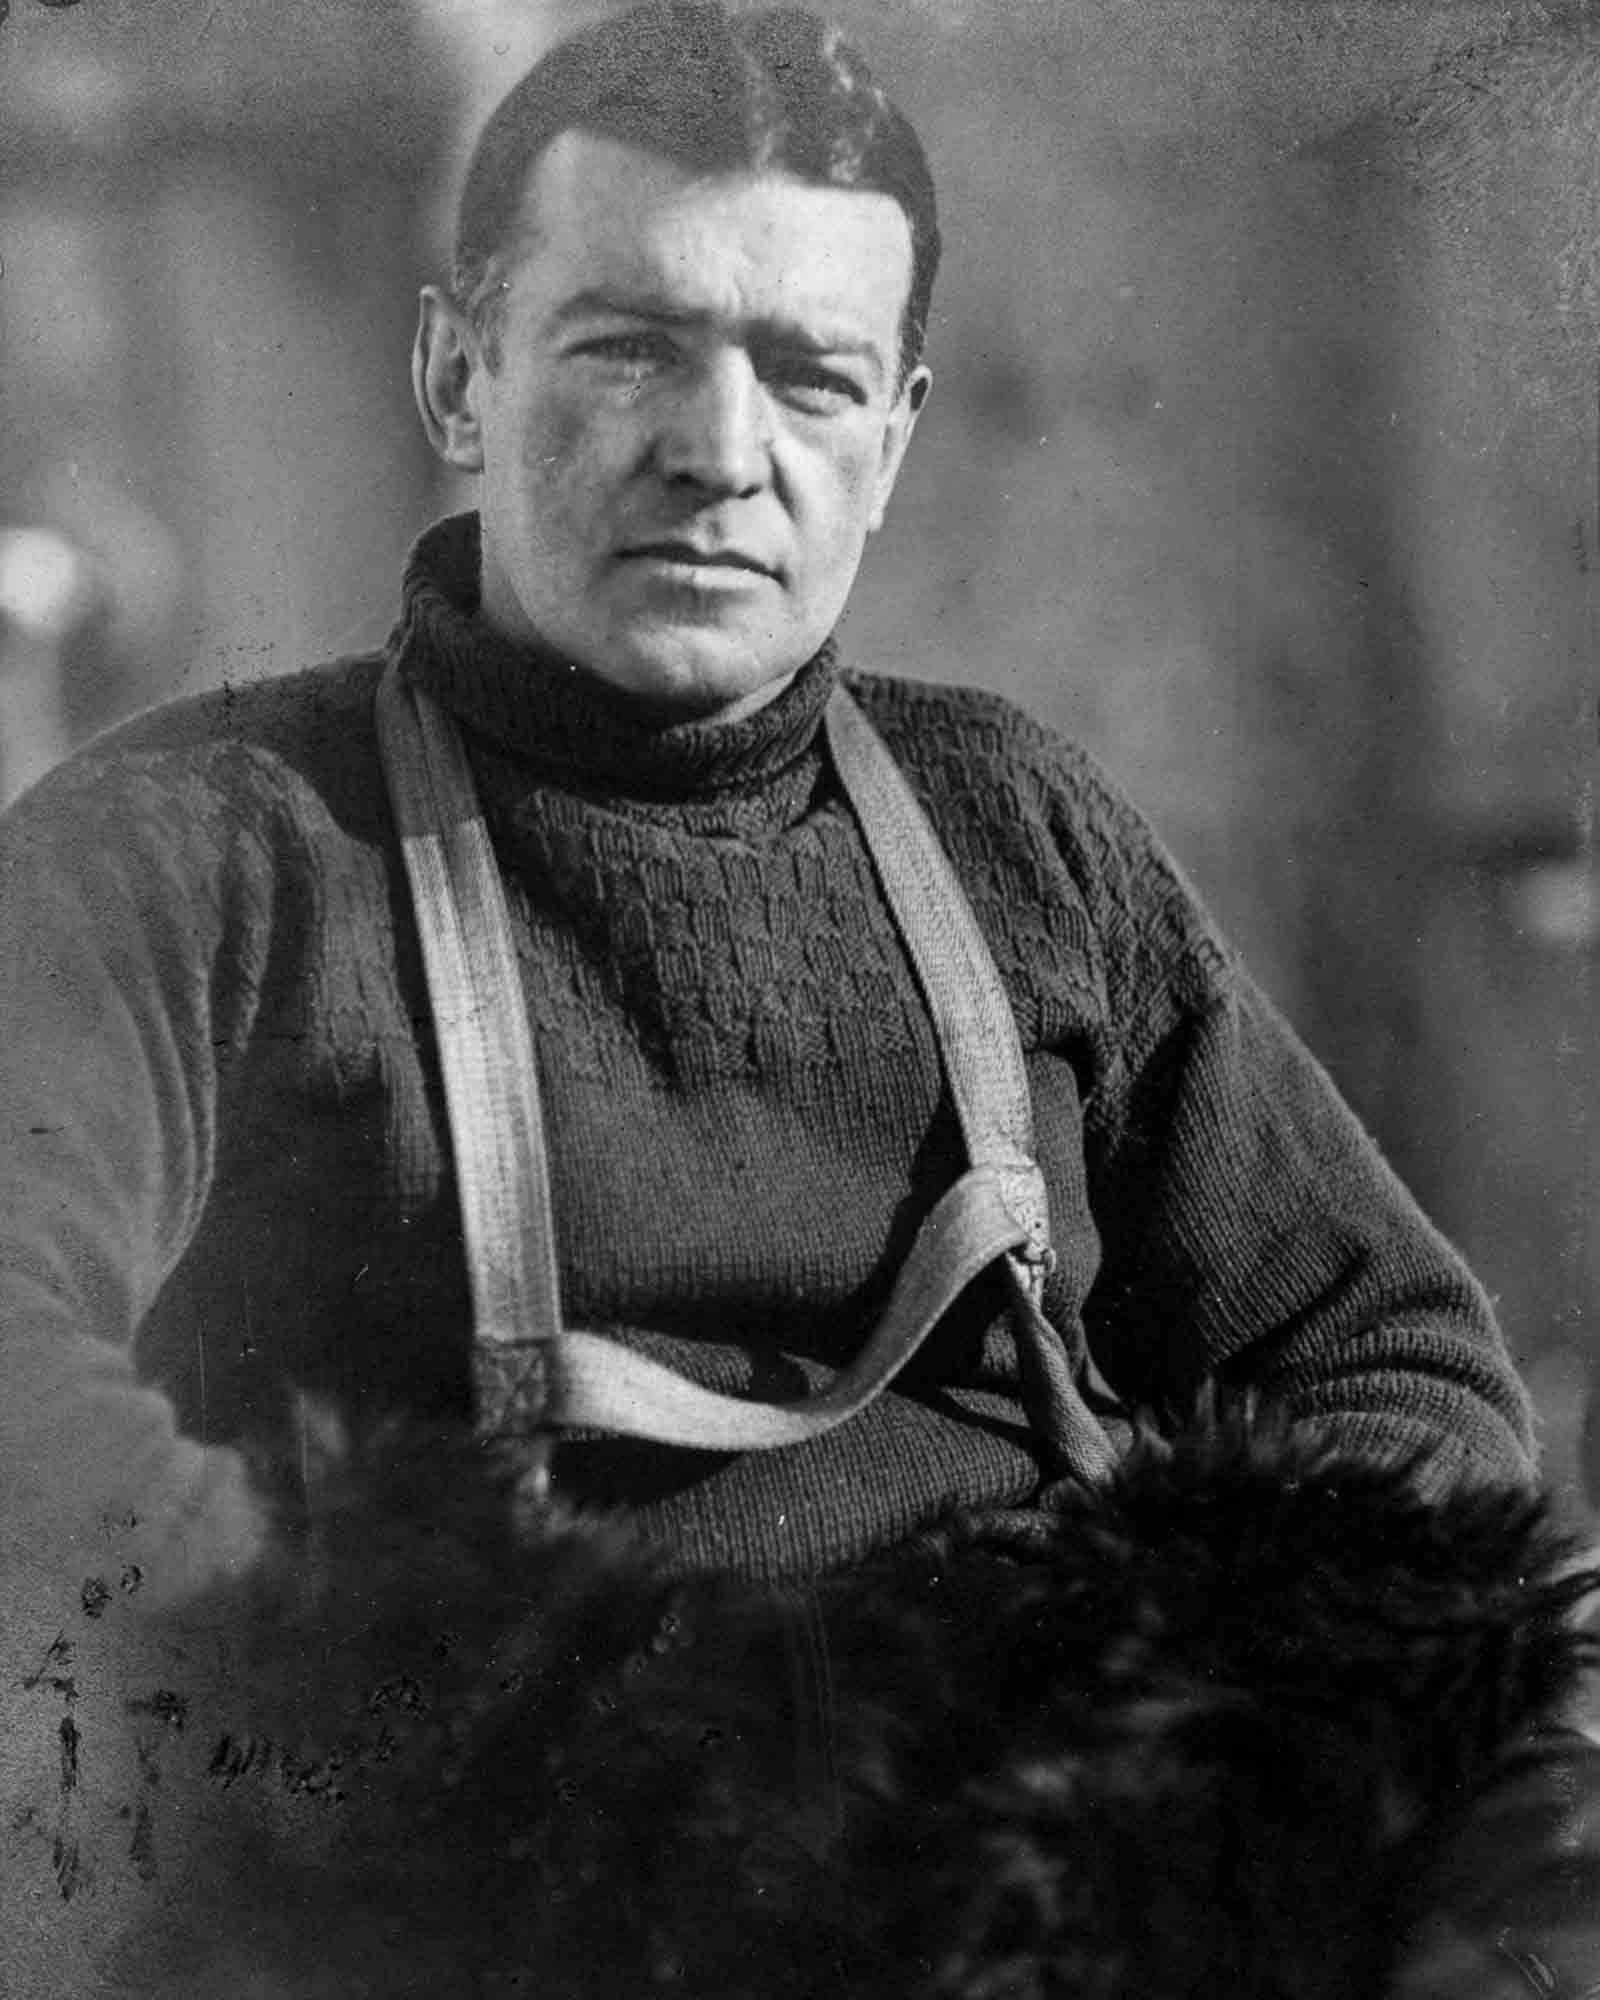 Ernest Shackleton, leader of the Imperial Trans-Antarctic Expedition.